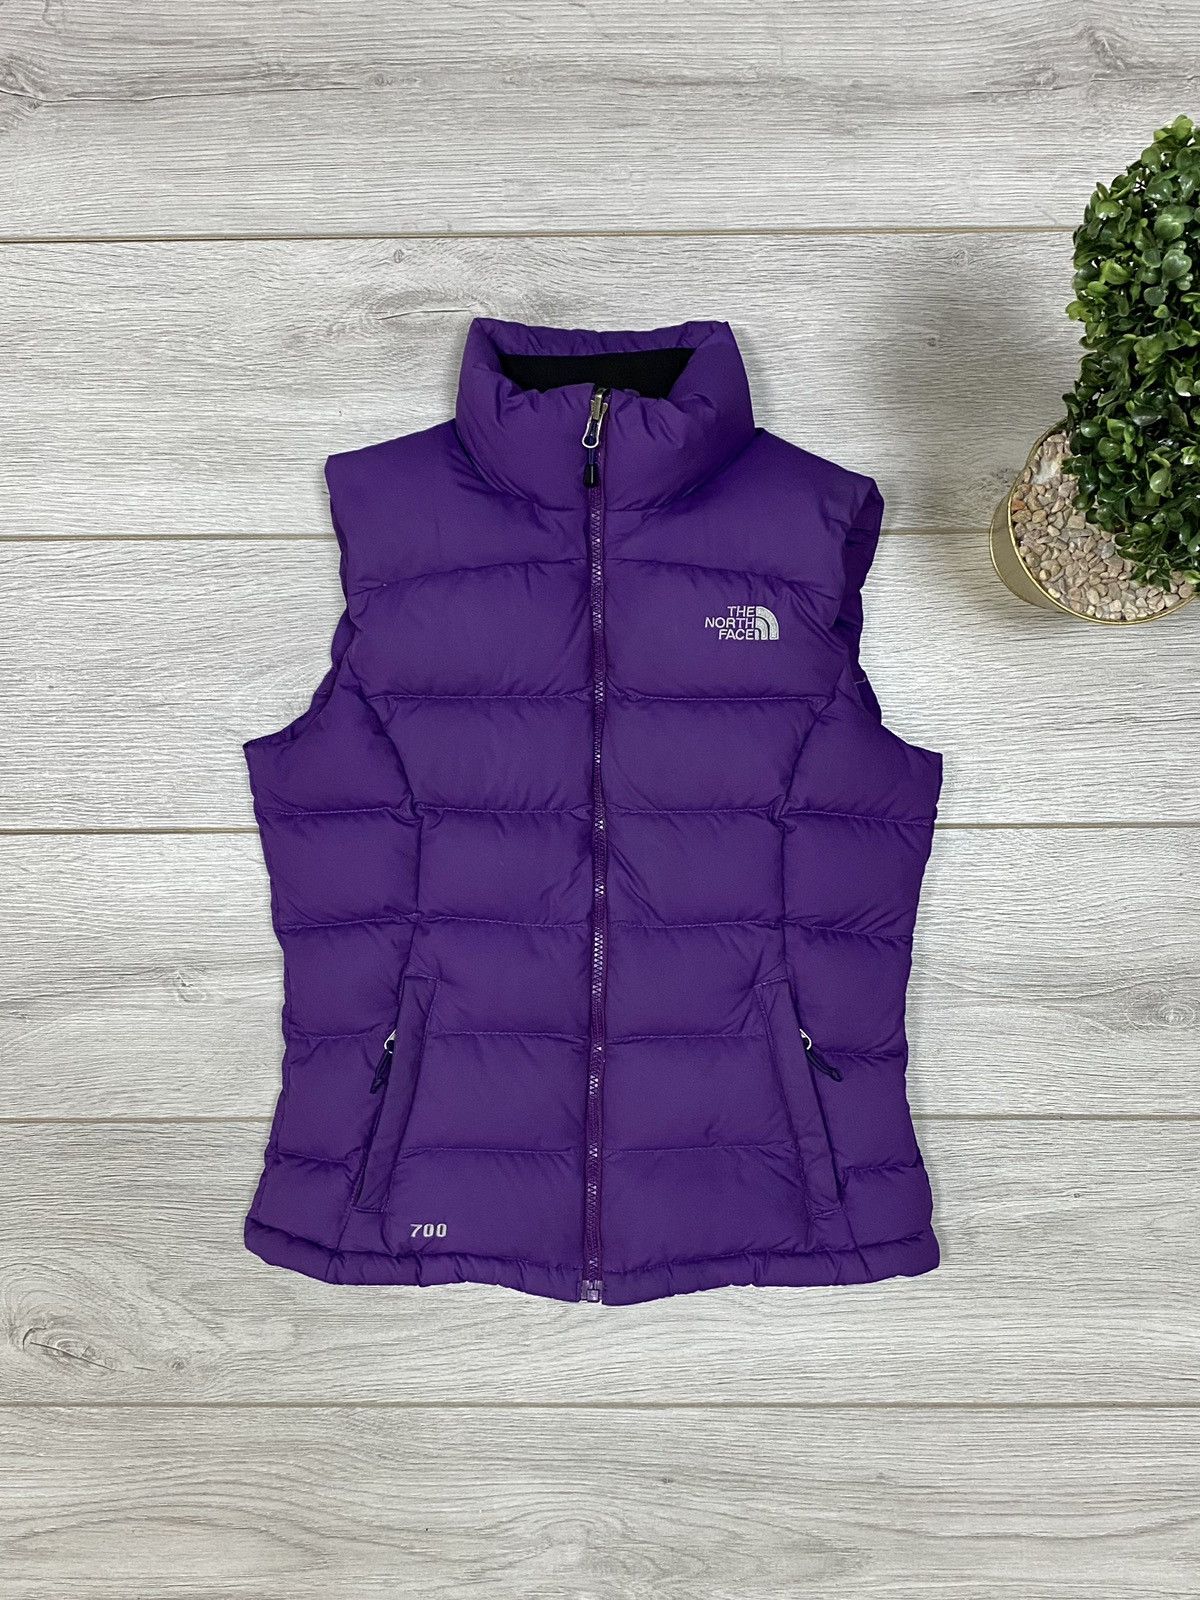 The North Face The North Face 700 purple women down vest Size XS / US 0-2 / IT 36-38 - 2 Preview